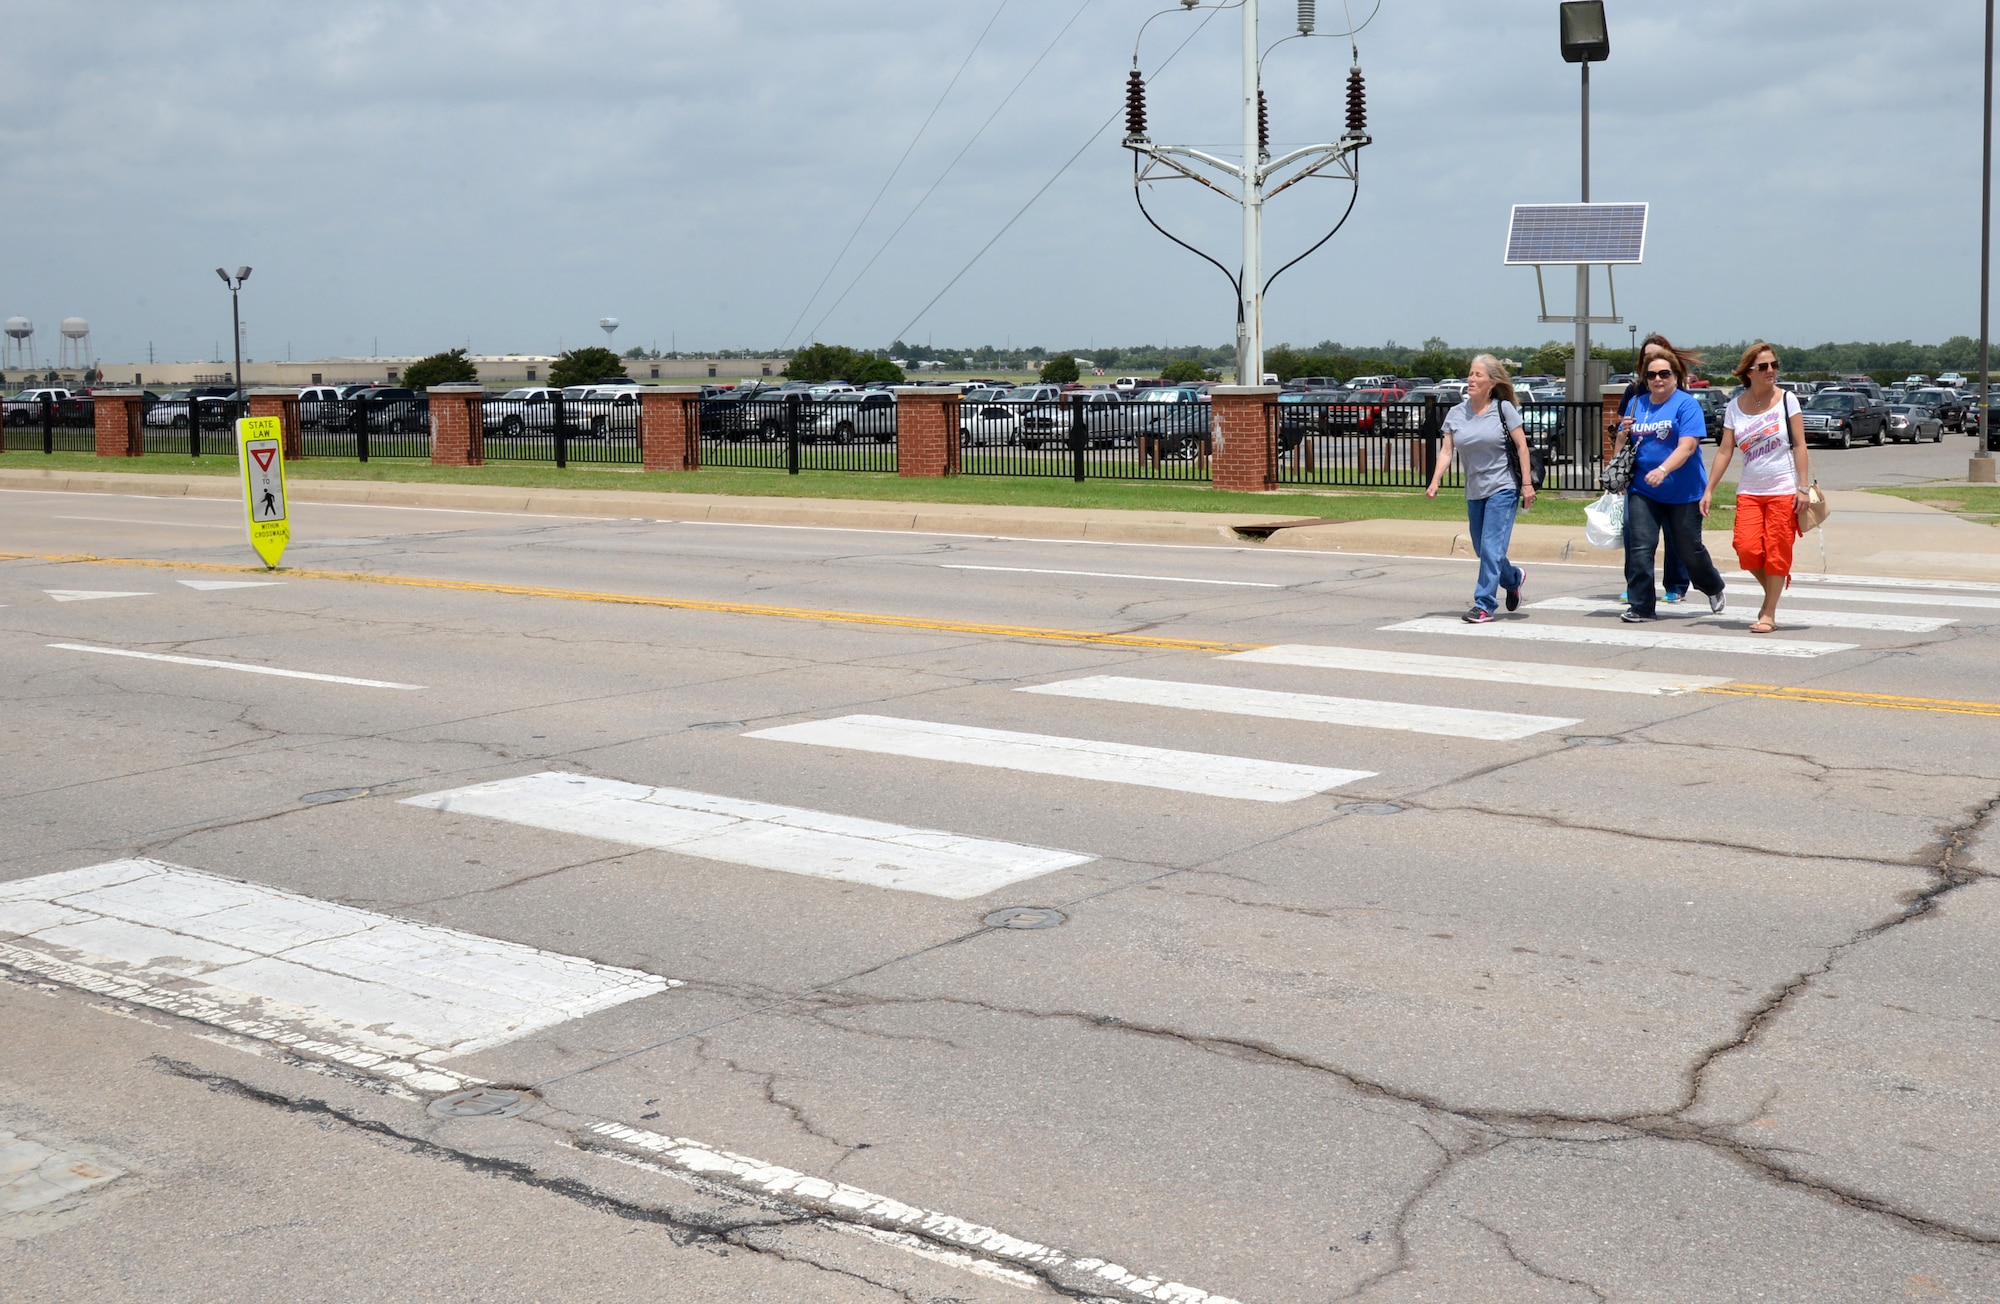 Many vehicle-pedestrian mishaps could be avoided if both the driver and the walker are paying attention. Pedestrians should always make eye contact with drivers before they enter the crosswalk. (Air Force photo by Kelly White)